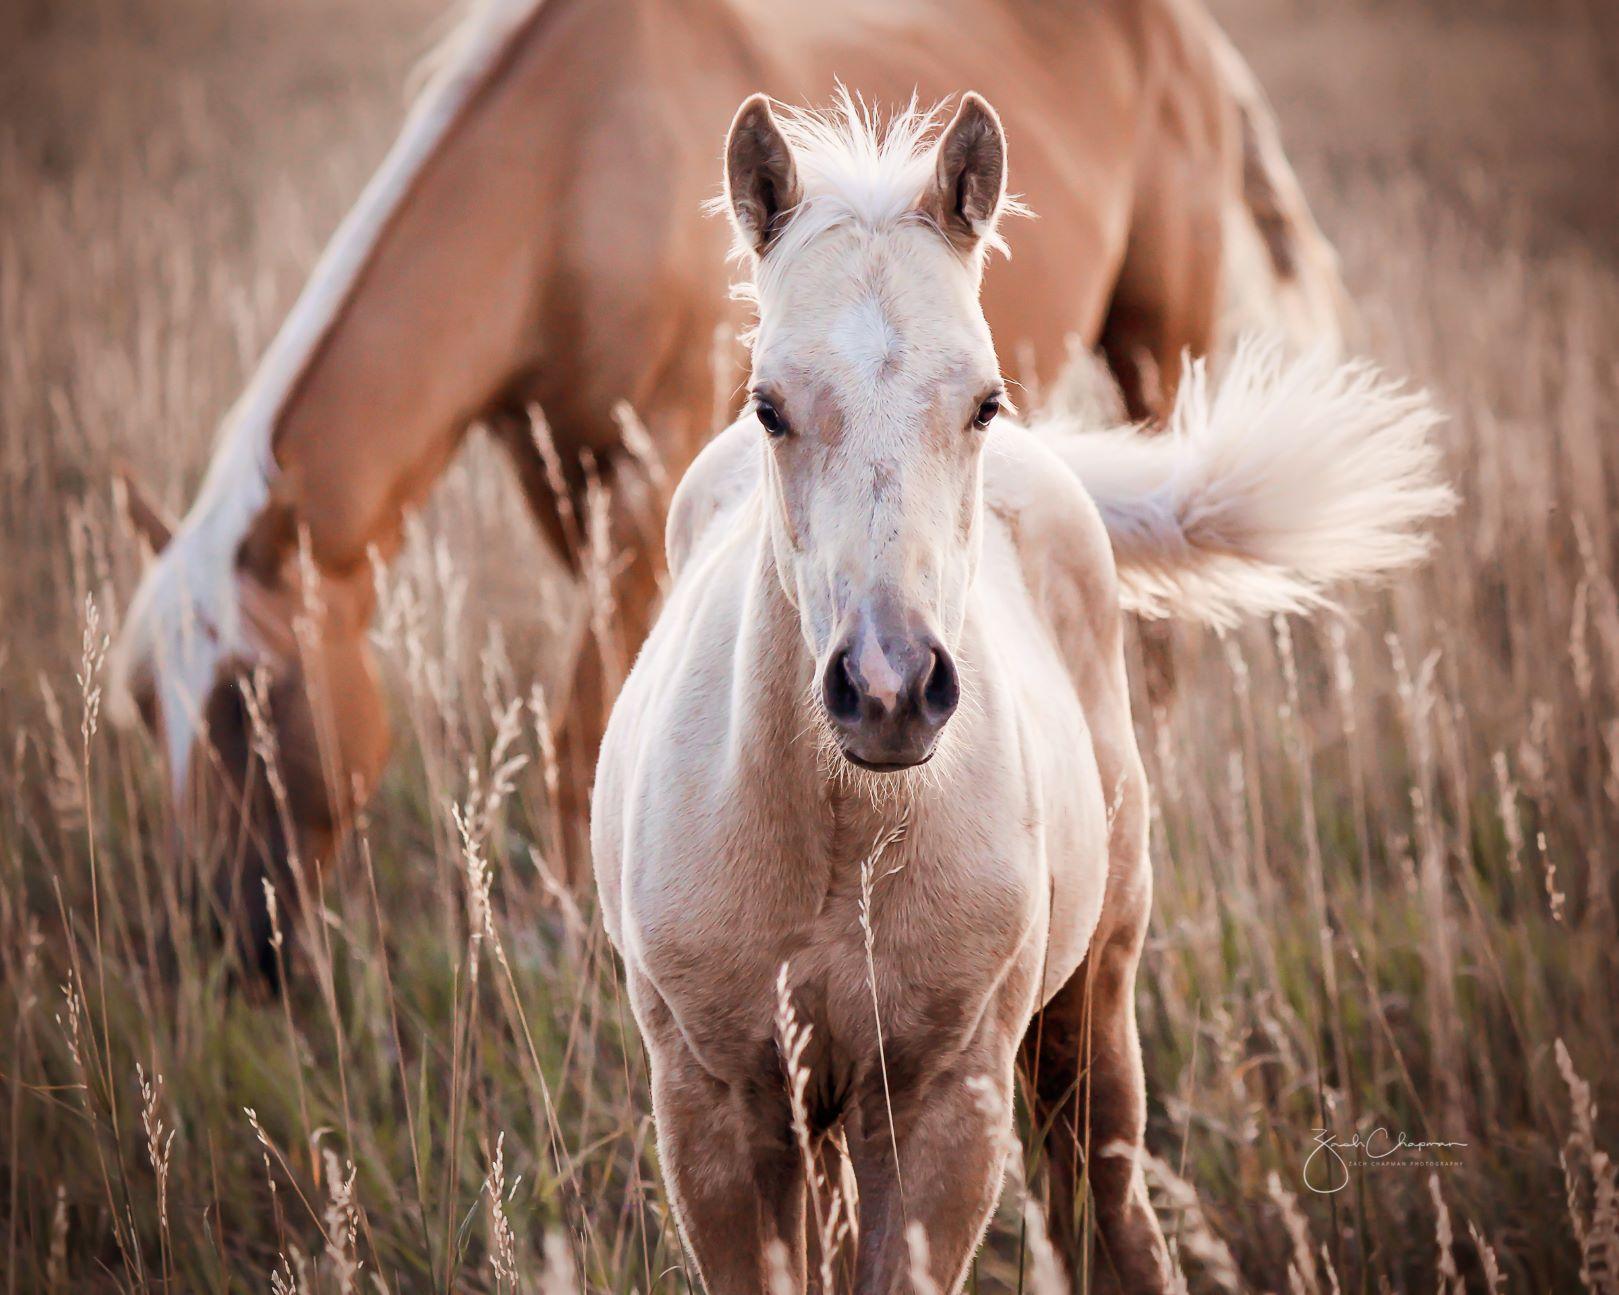 A horse with a foal in the foreground